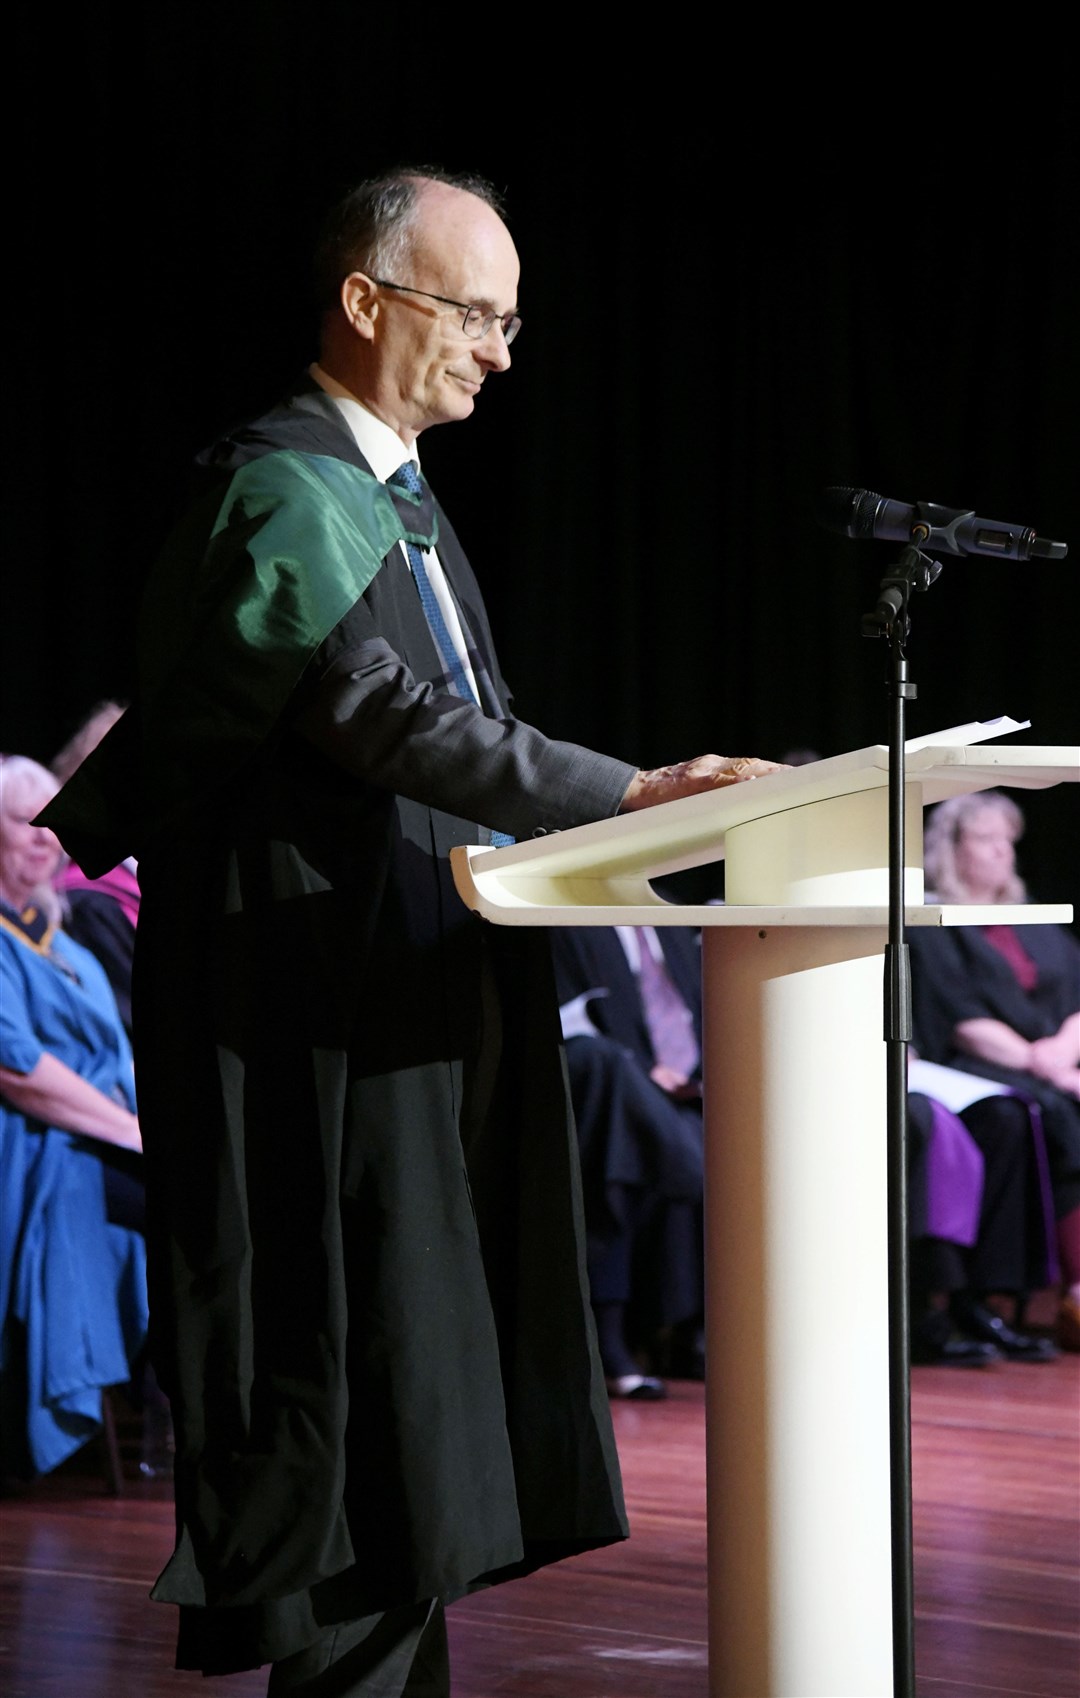 David Patterson, Principal and CEO, giving his speech and the presentation of awards at the University of Highlands and Islands graduation ceremony at Elgin Town Hall on October 6th...Picture: Beth Taylor.